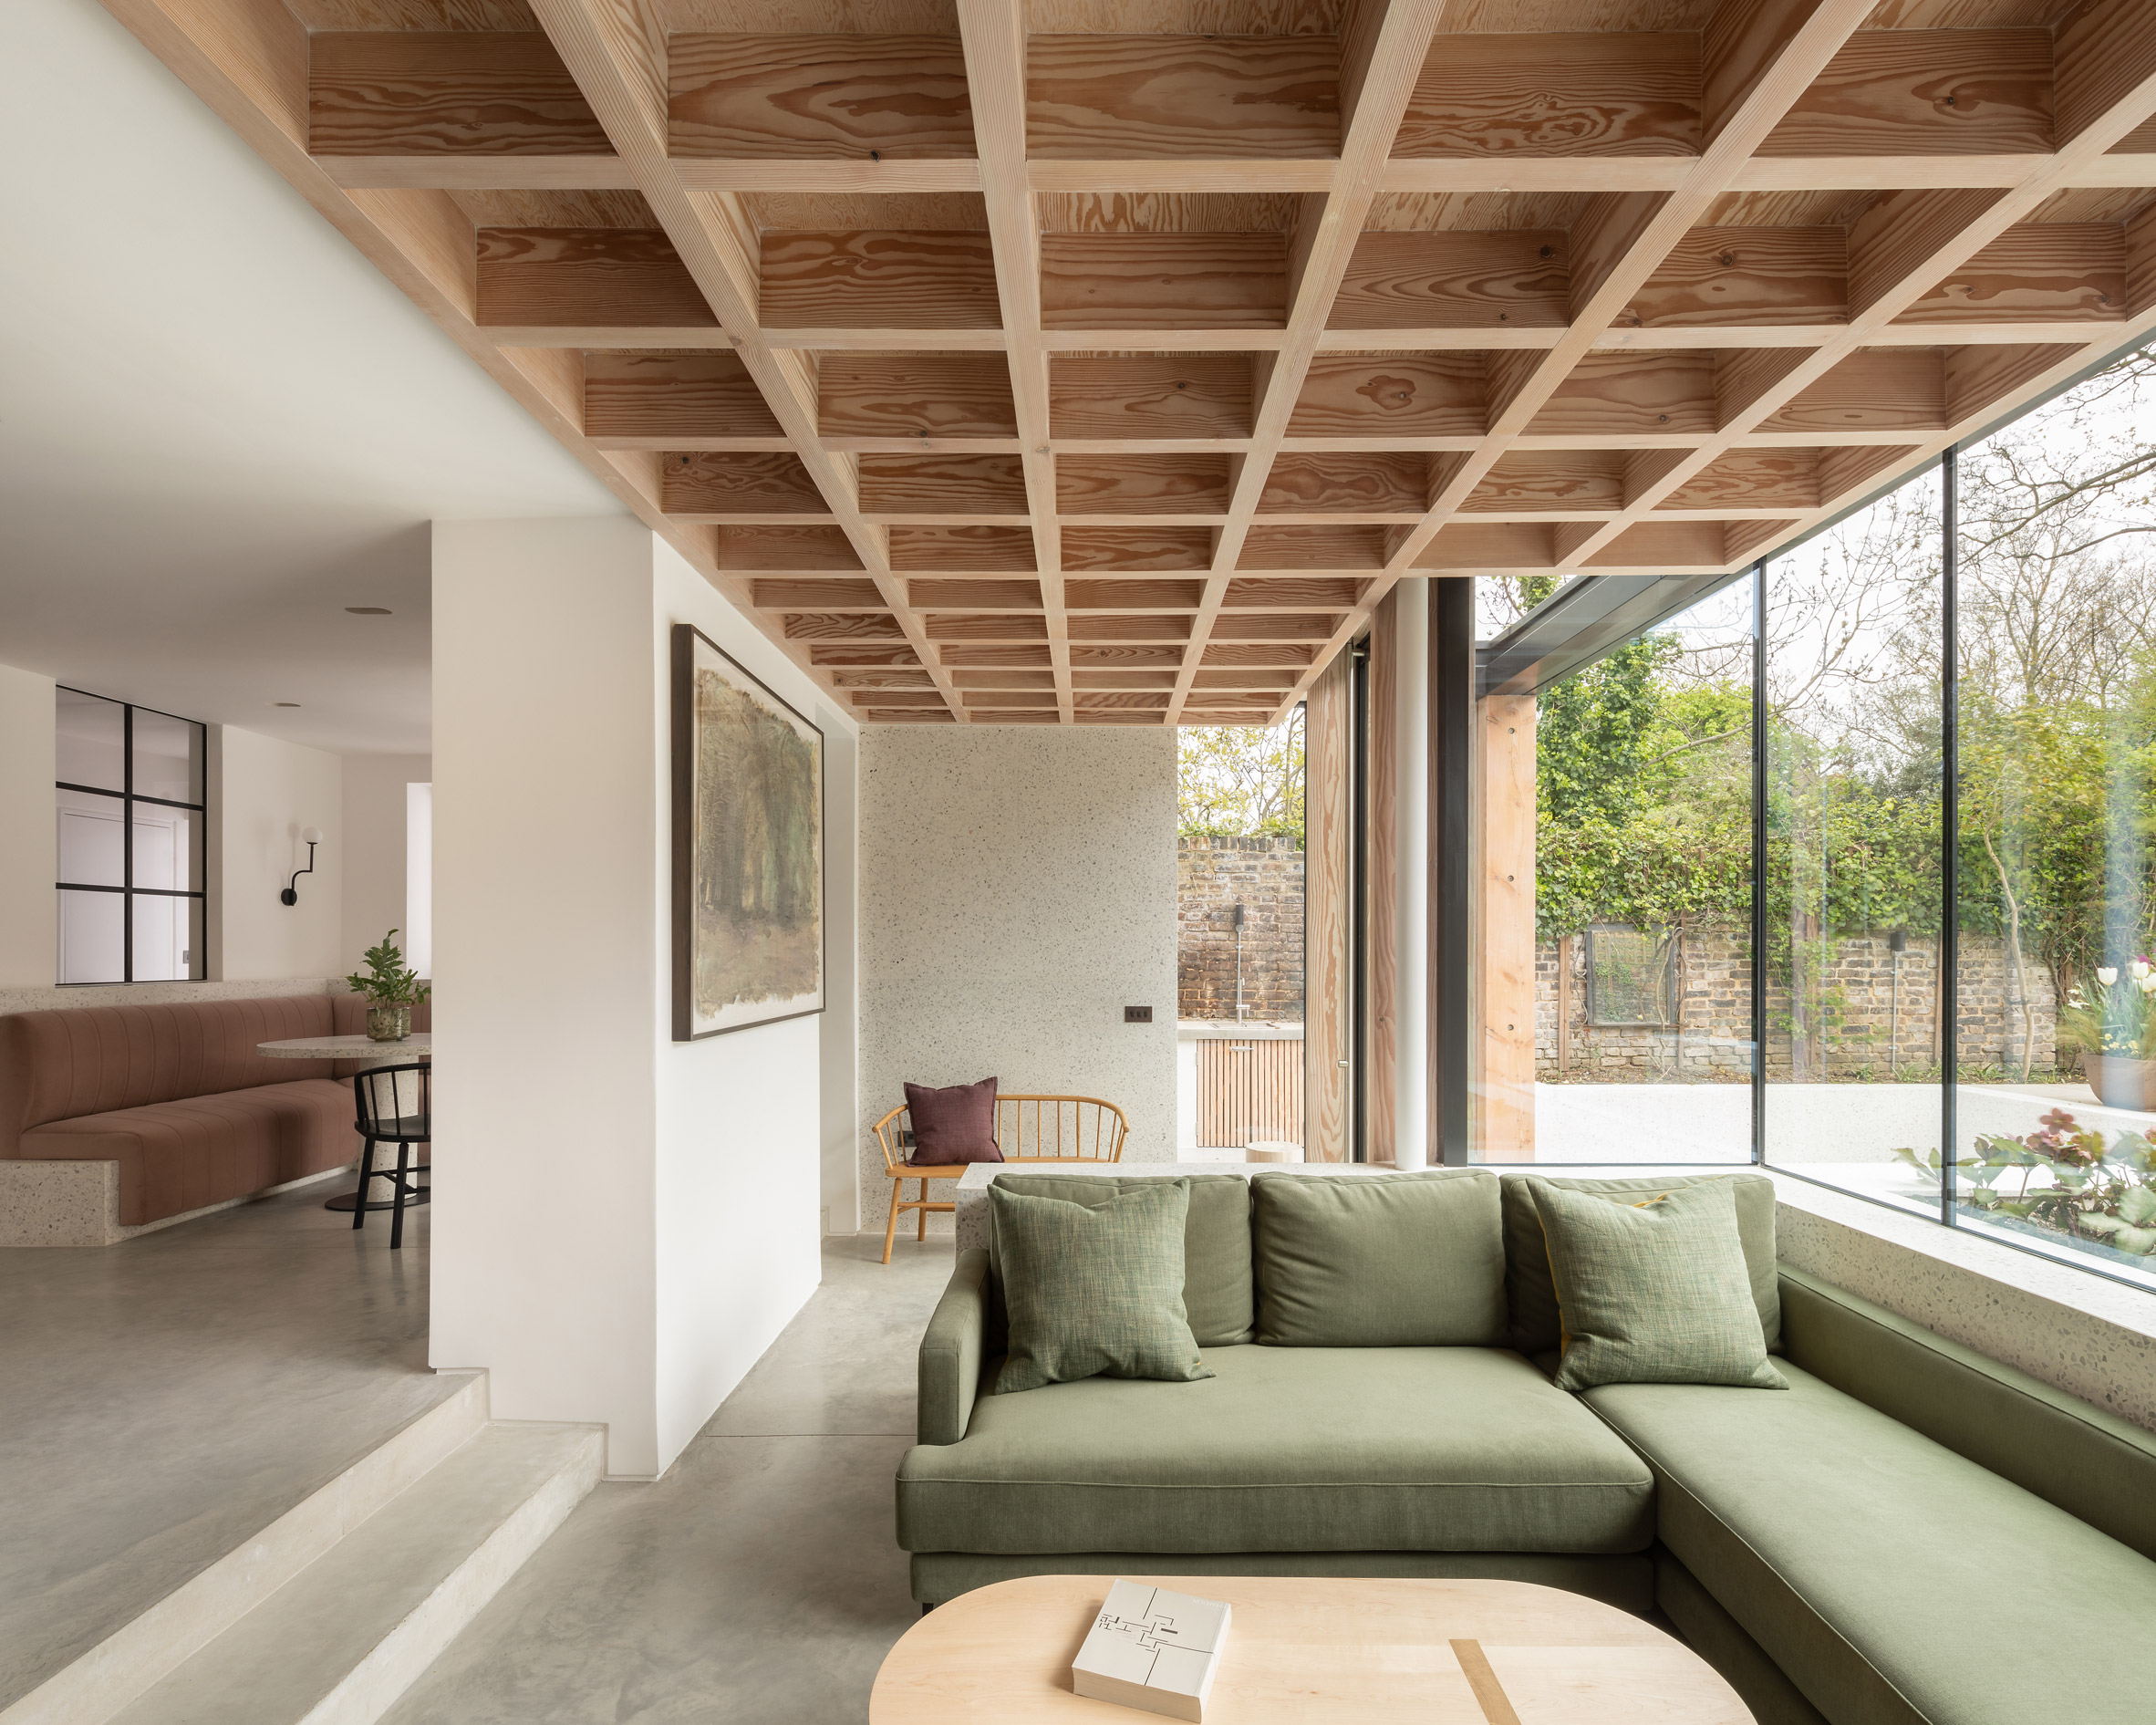 Interior of a London home extension by Will Gamble Architects